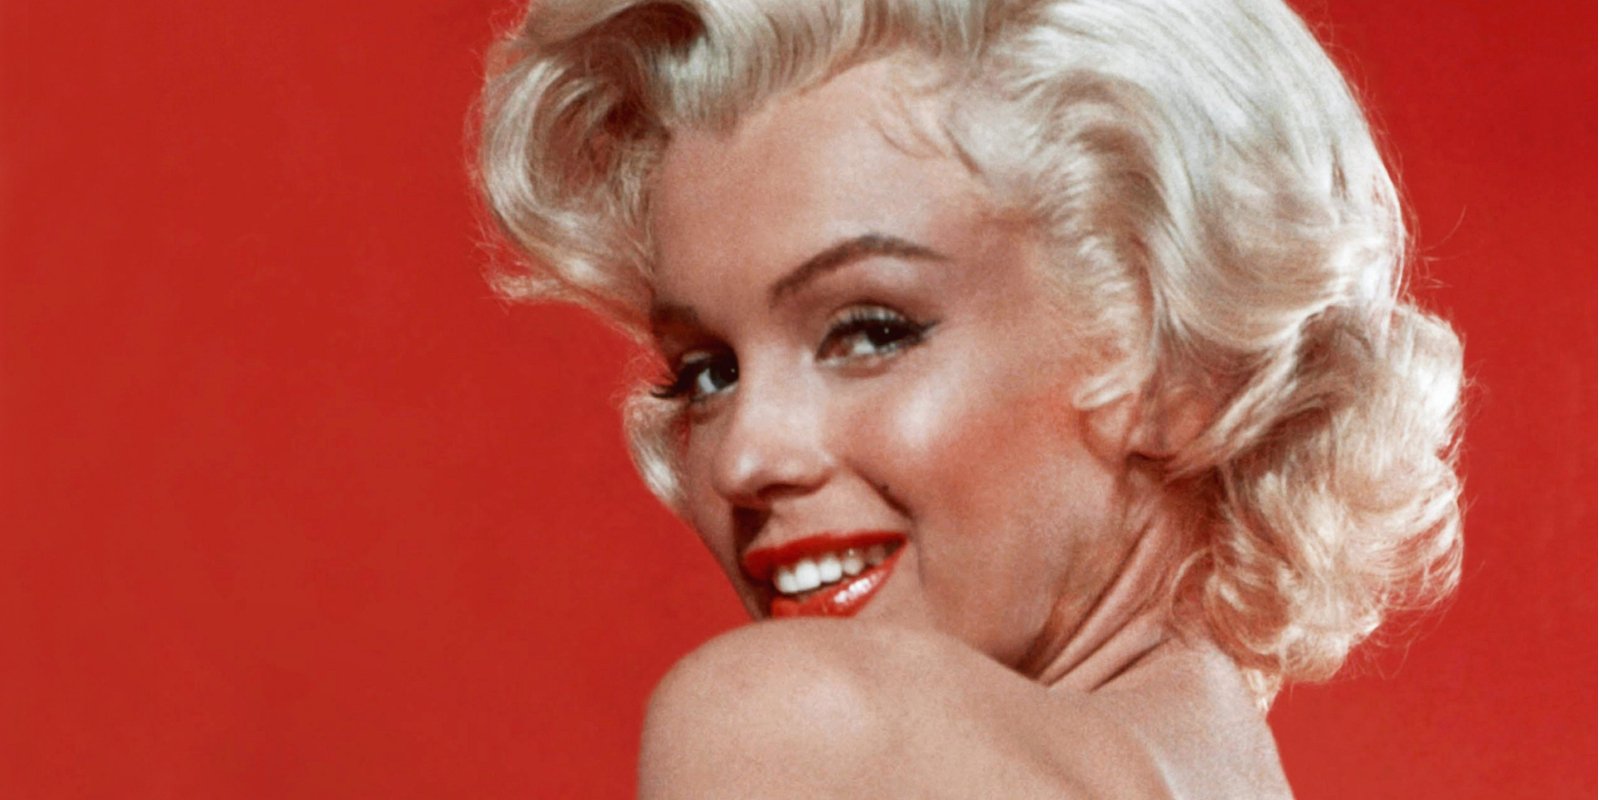 Film Historian Alleges ‘There Wasn’t a Real Marilyn Monroe’